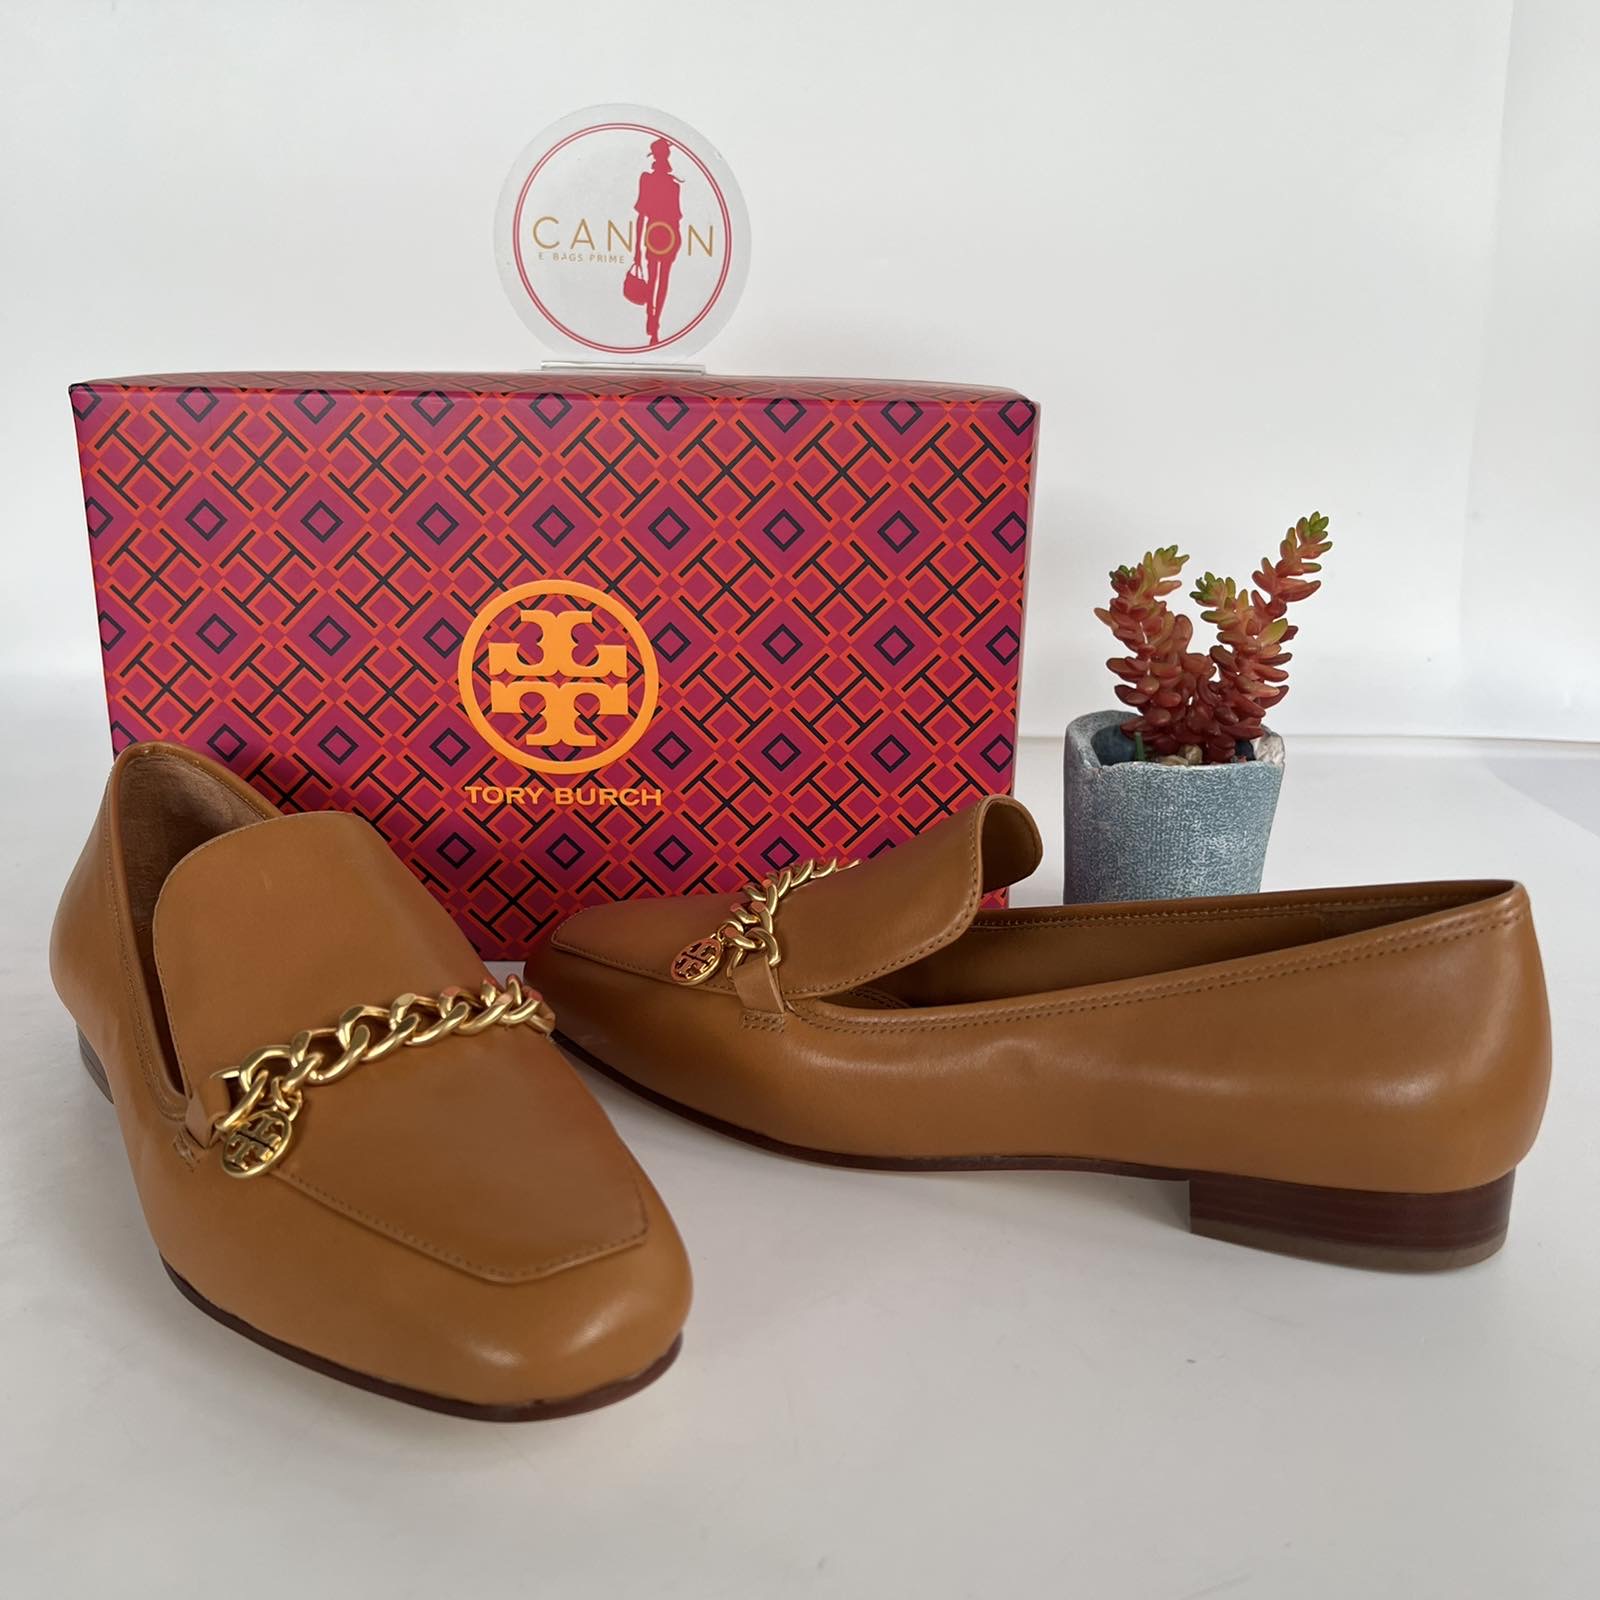 Tory Burch Benton 20mm Charm Loafers Calf Leather Ambra. Men's size 8. Made  in Vietnam. - Canon E-Bags Prime